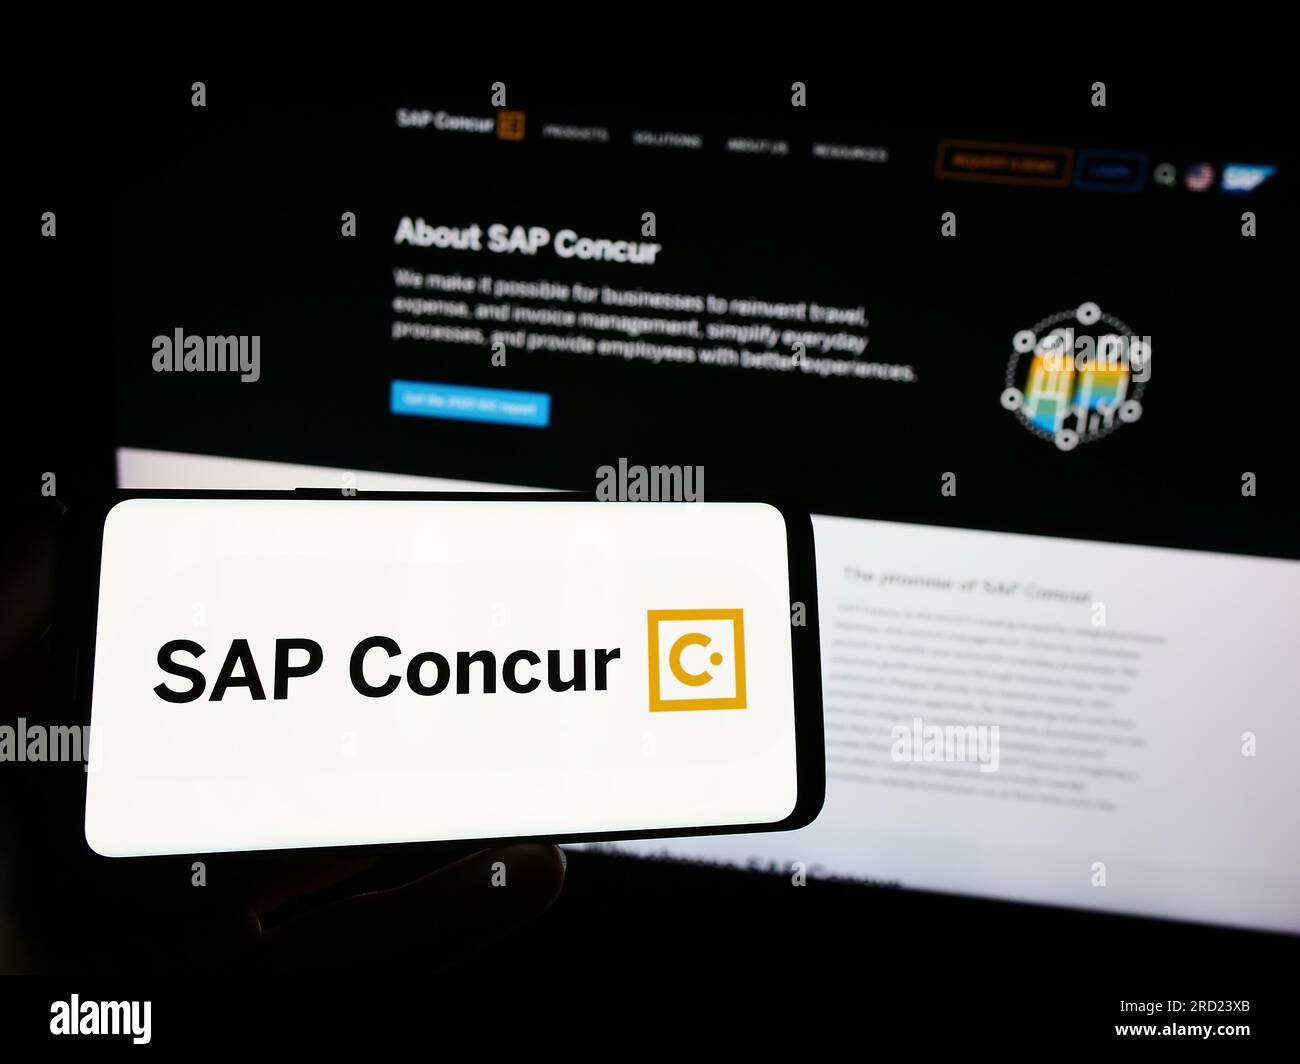 Person holding smartphone with logo of expense management software SAP Concur on screen in front of website. Focus on phone display. Stock Photo